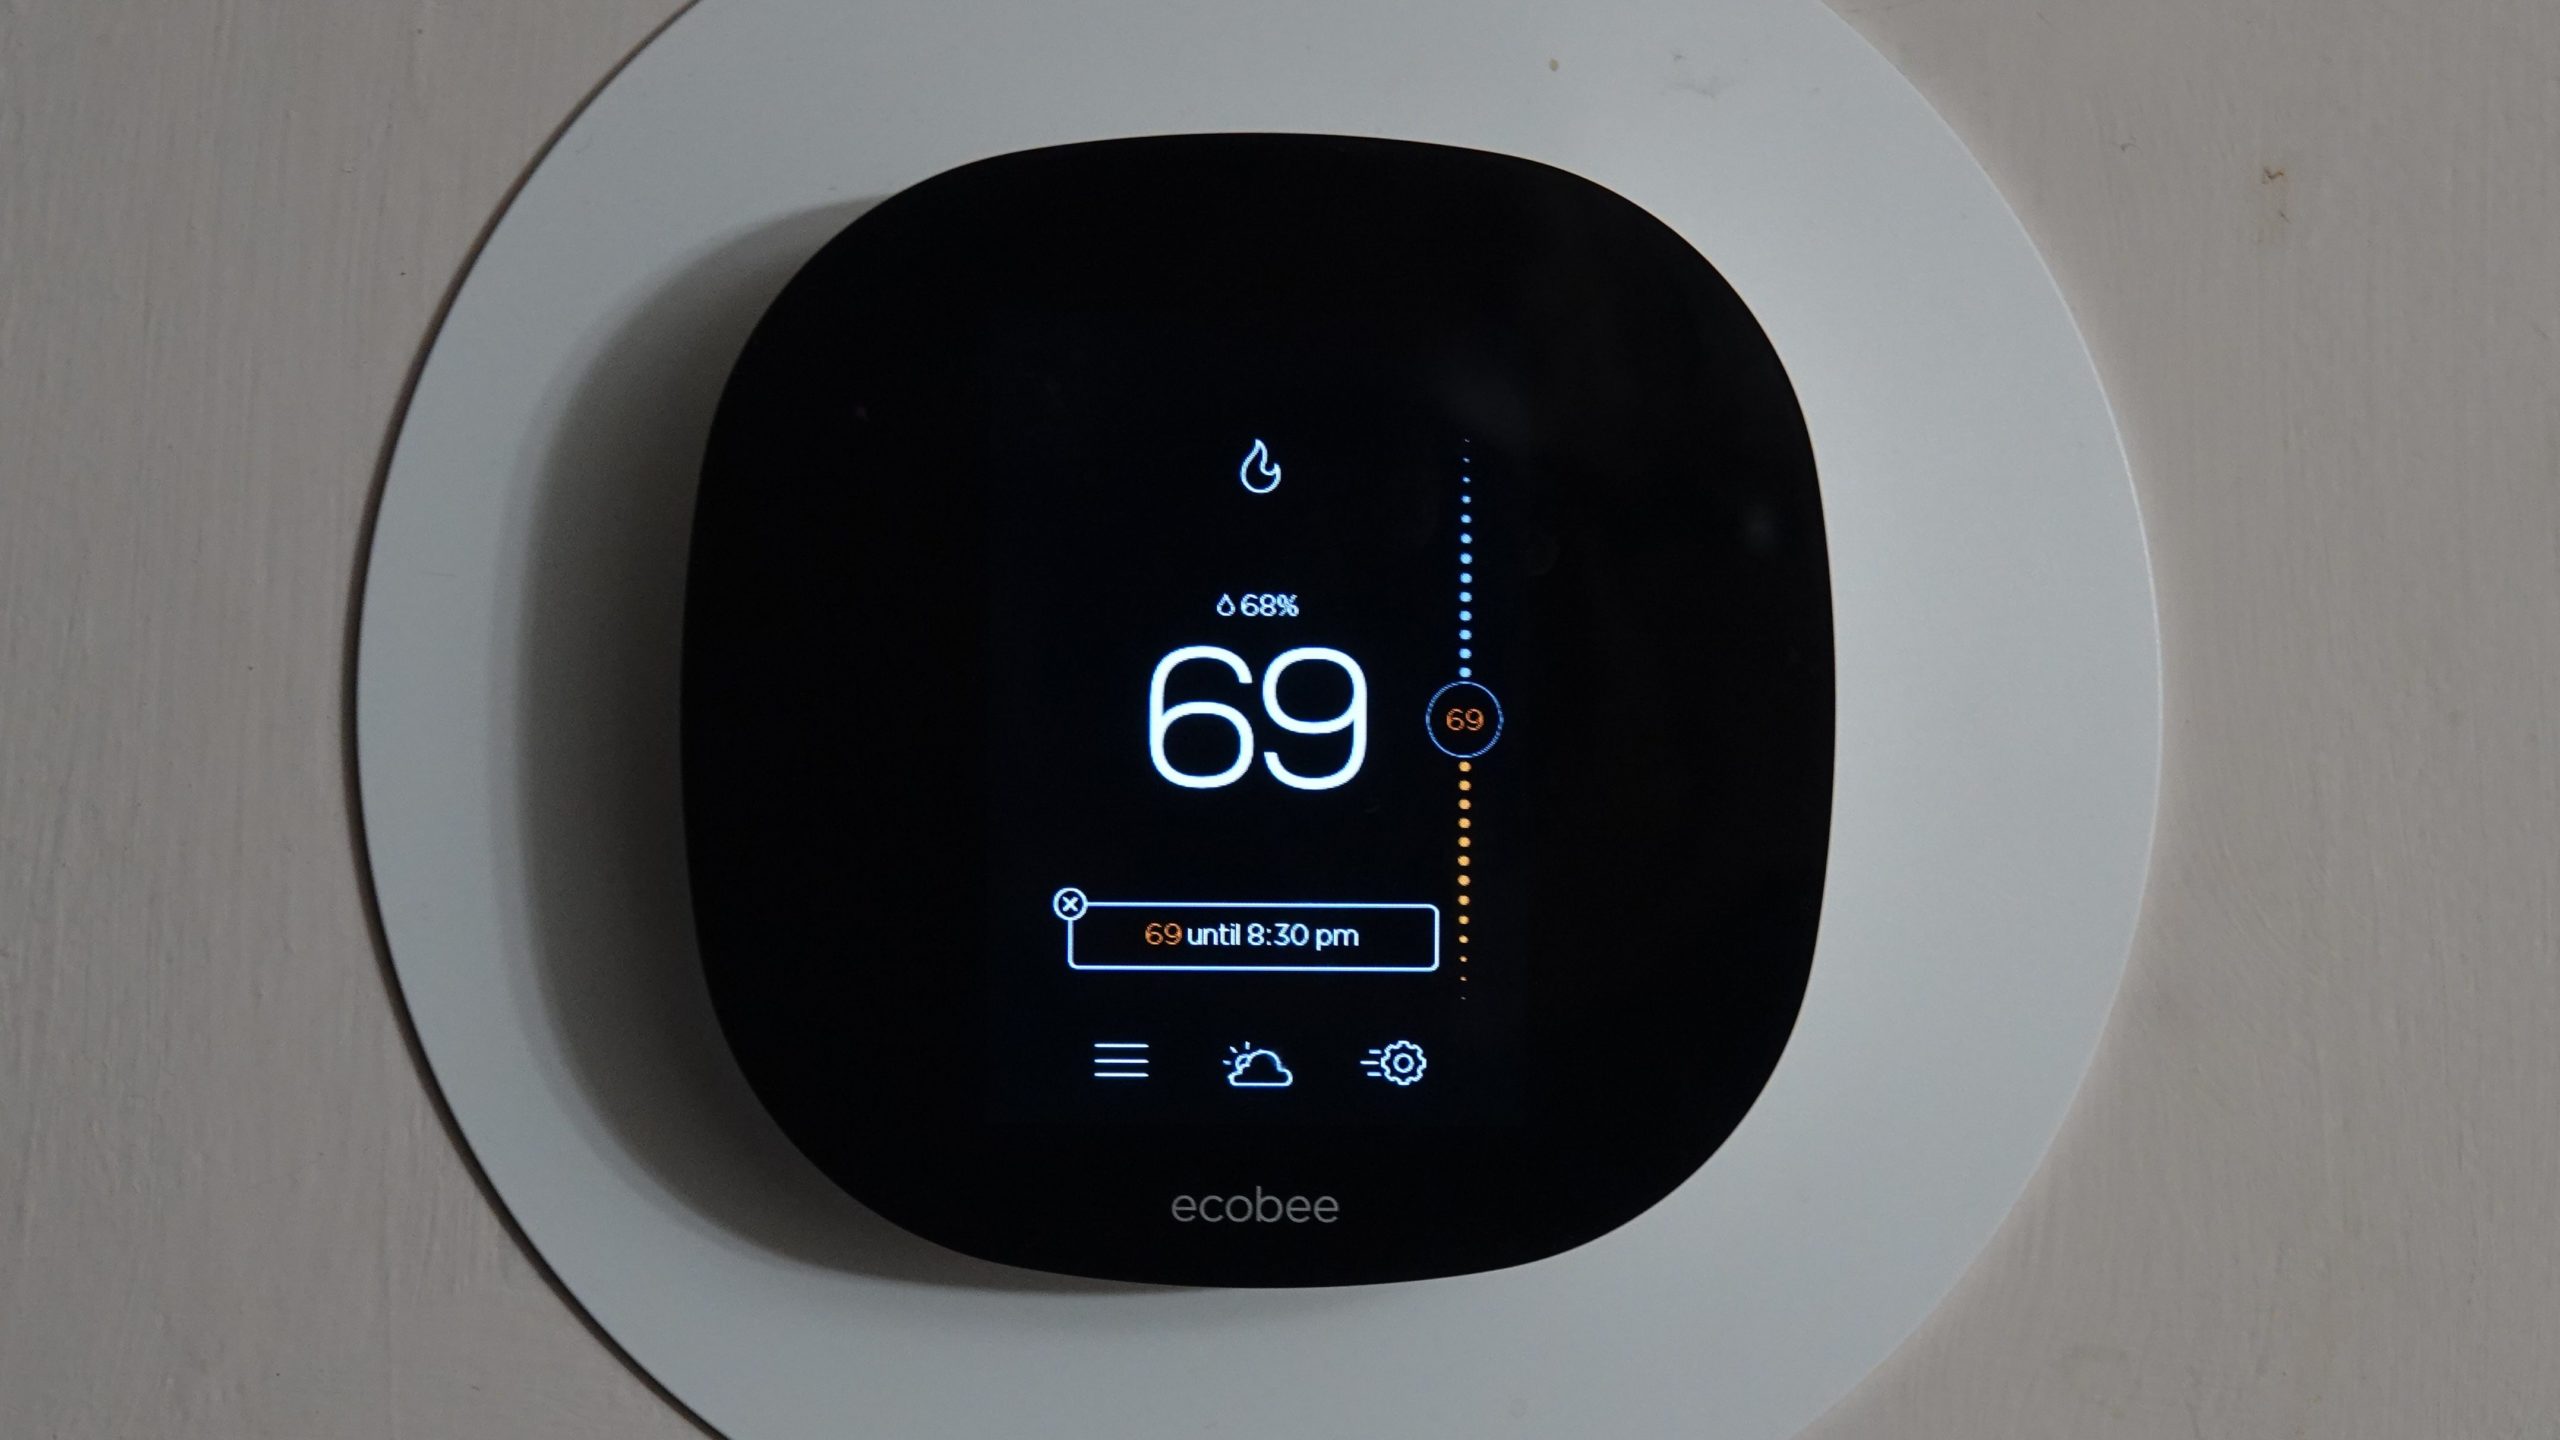 A smart thermostat with a temperature scheduling feature